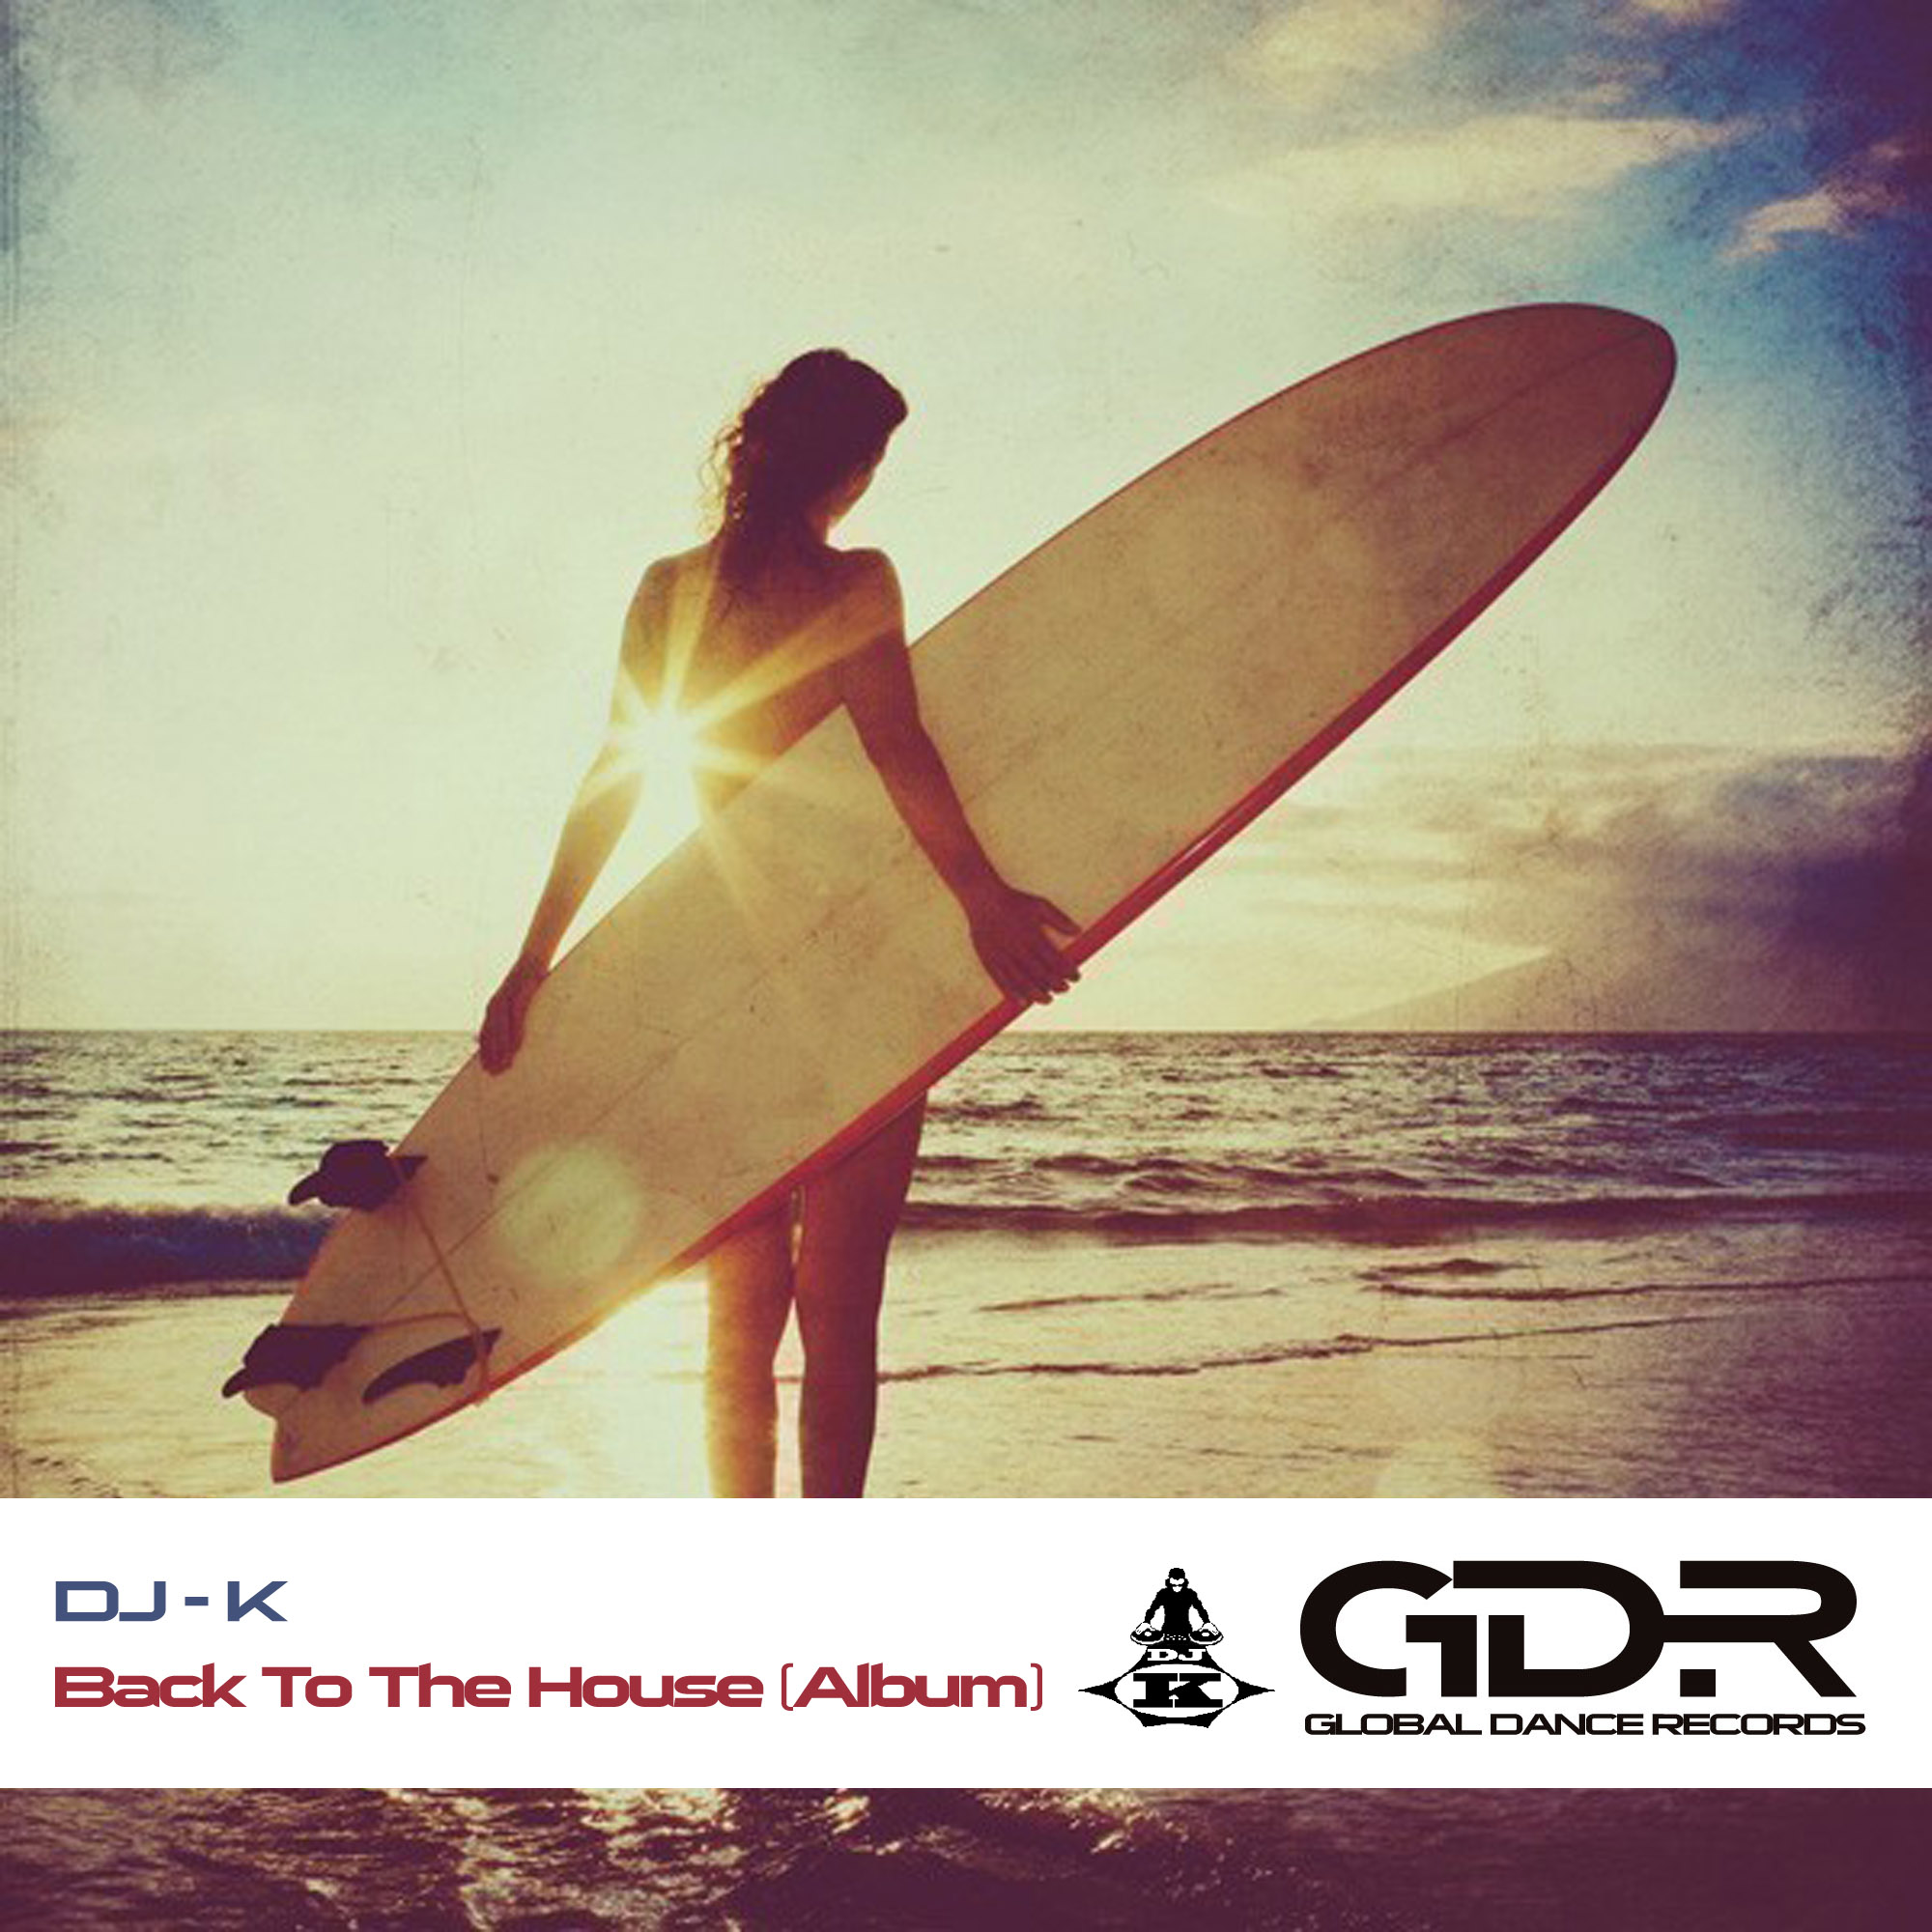 DJ-K – Back To The House (Album) OFFICIAL RELEASE